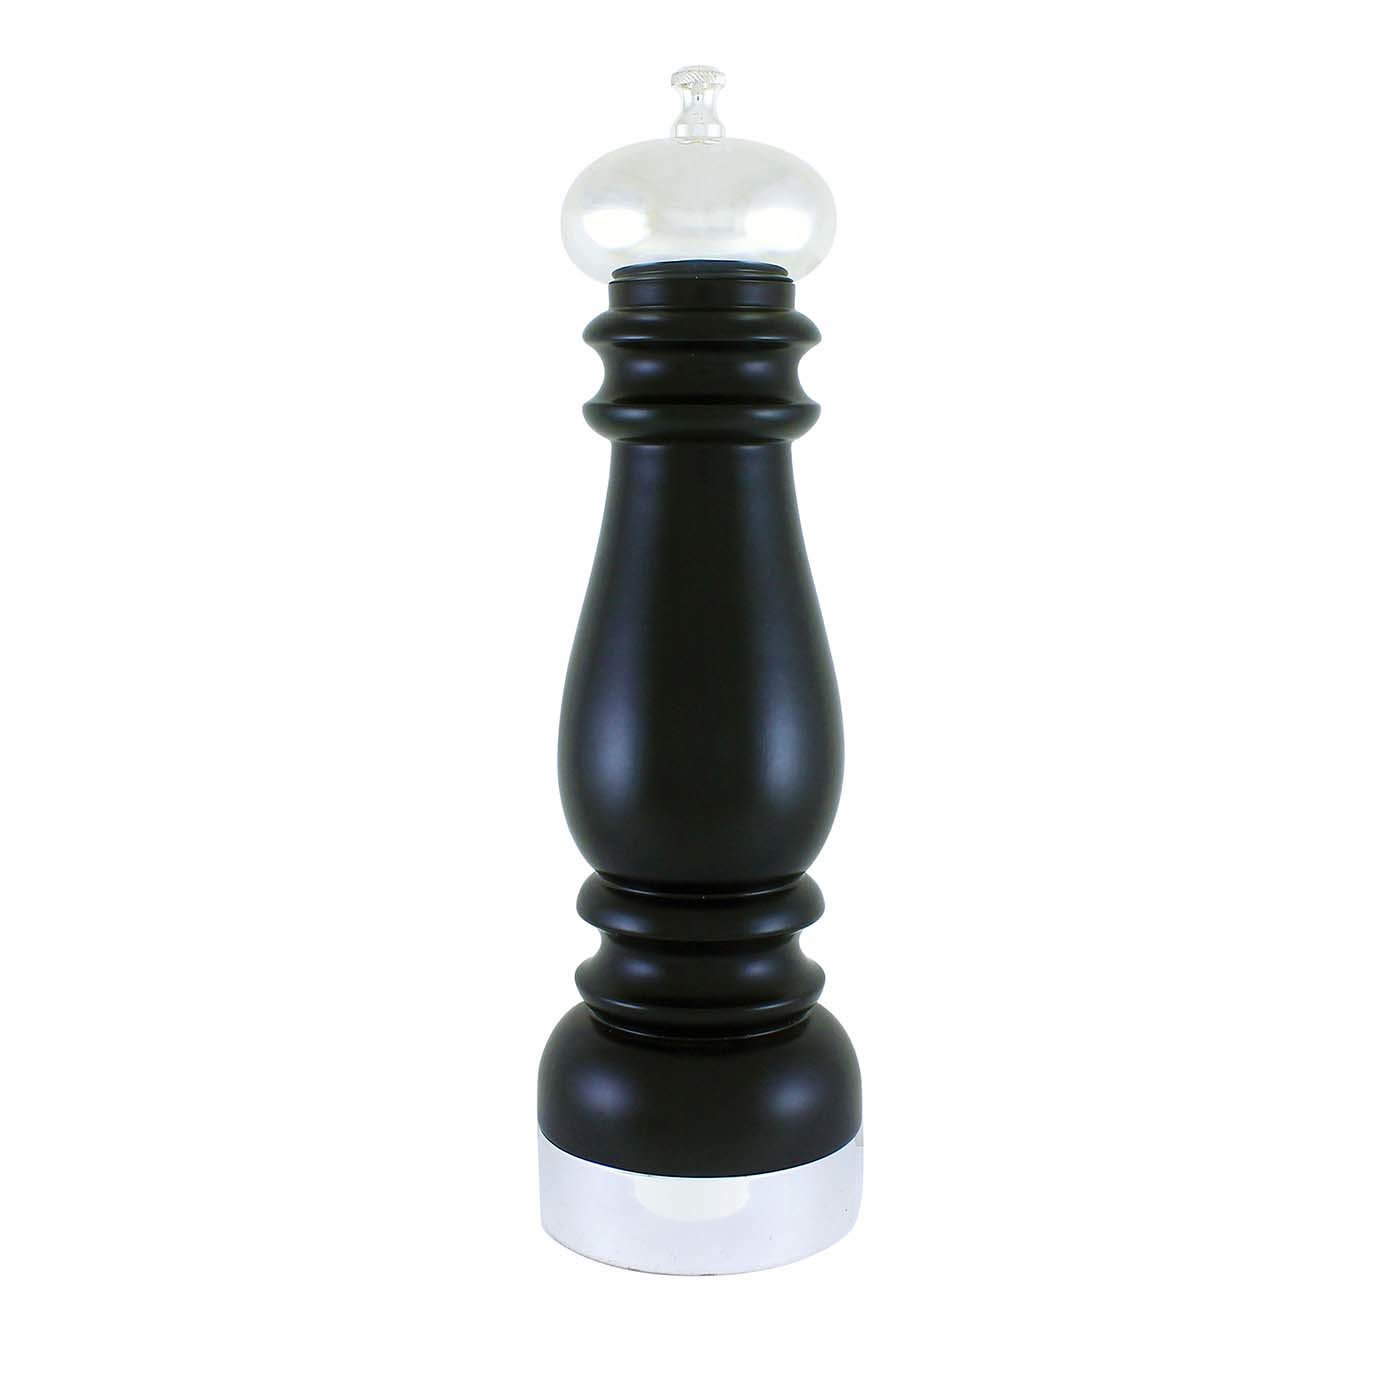 Black Wood and Silver-Plated Brass Pepper Grinder - Chiarugi 1952